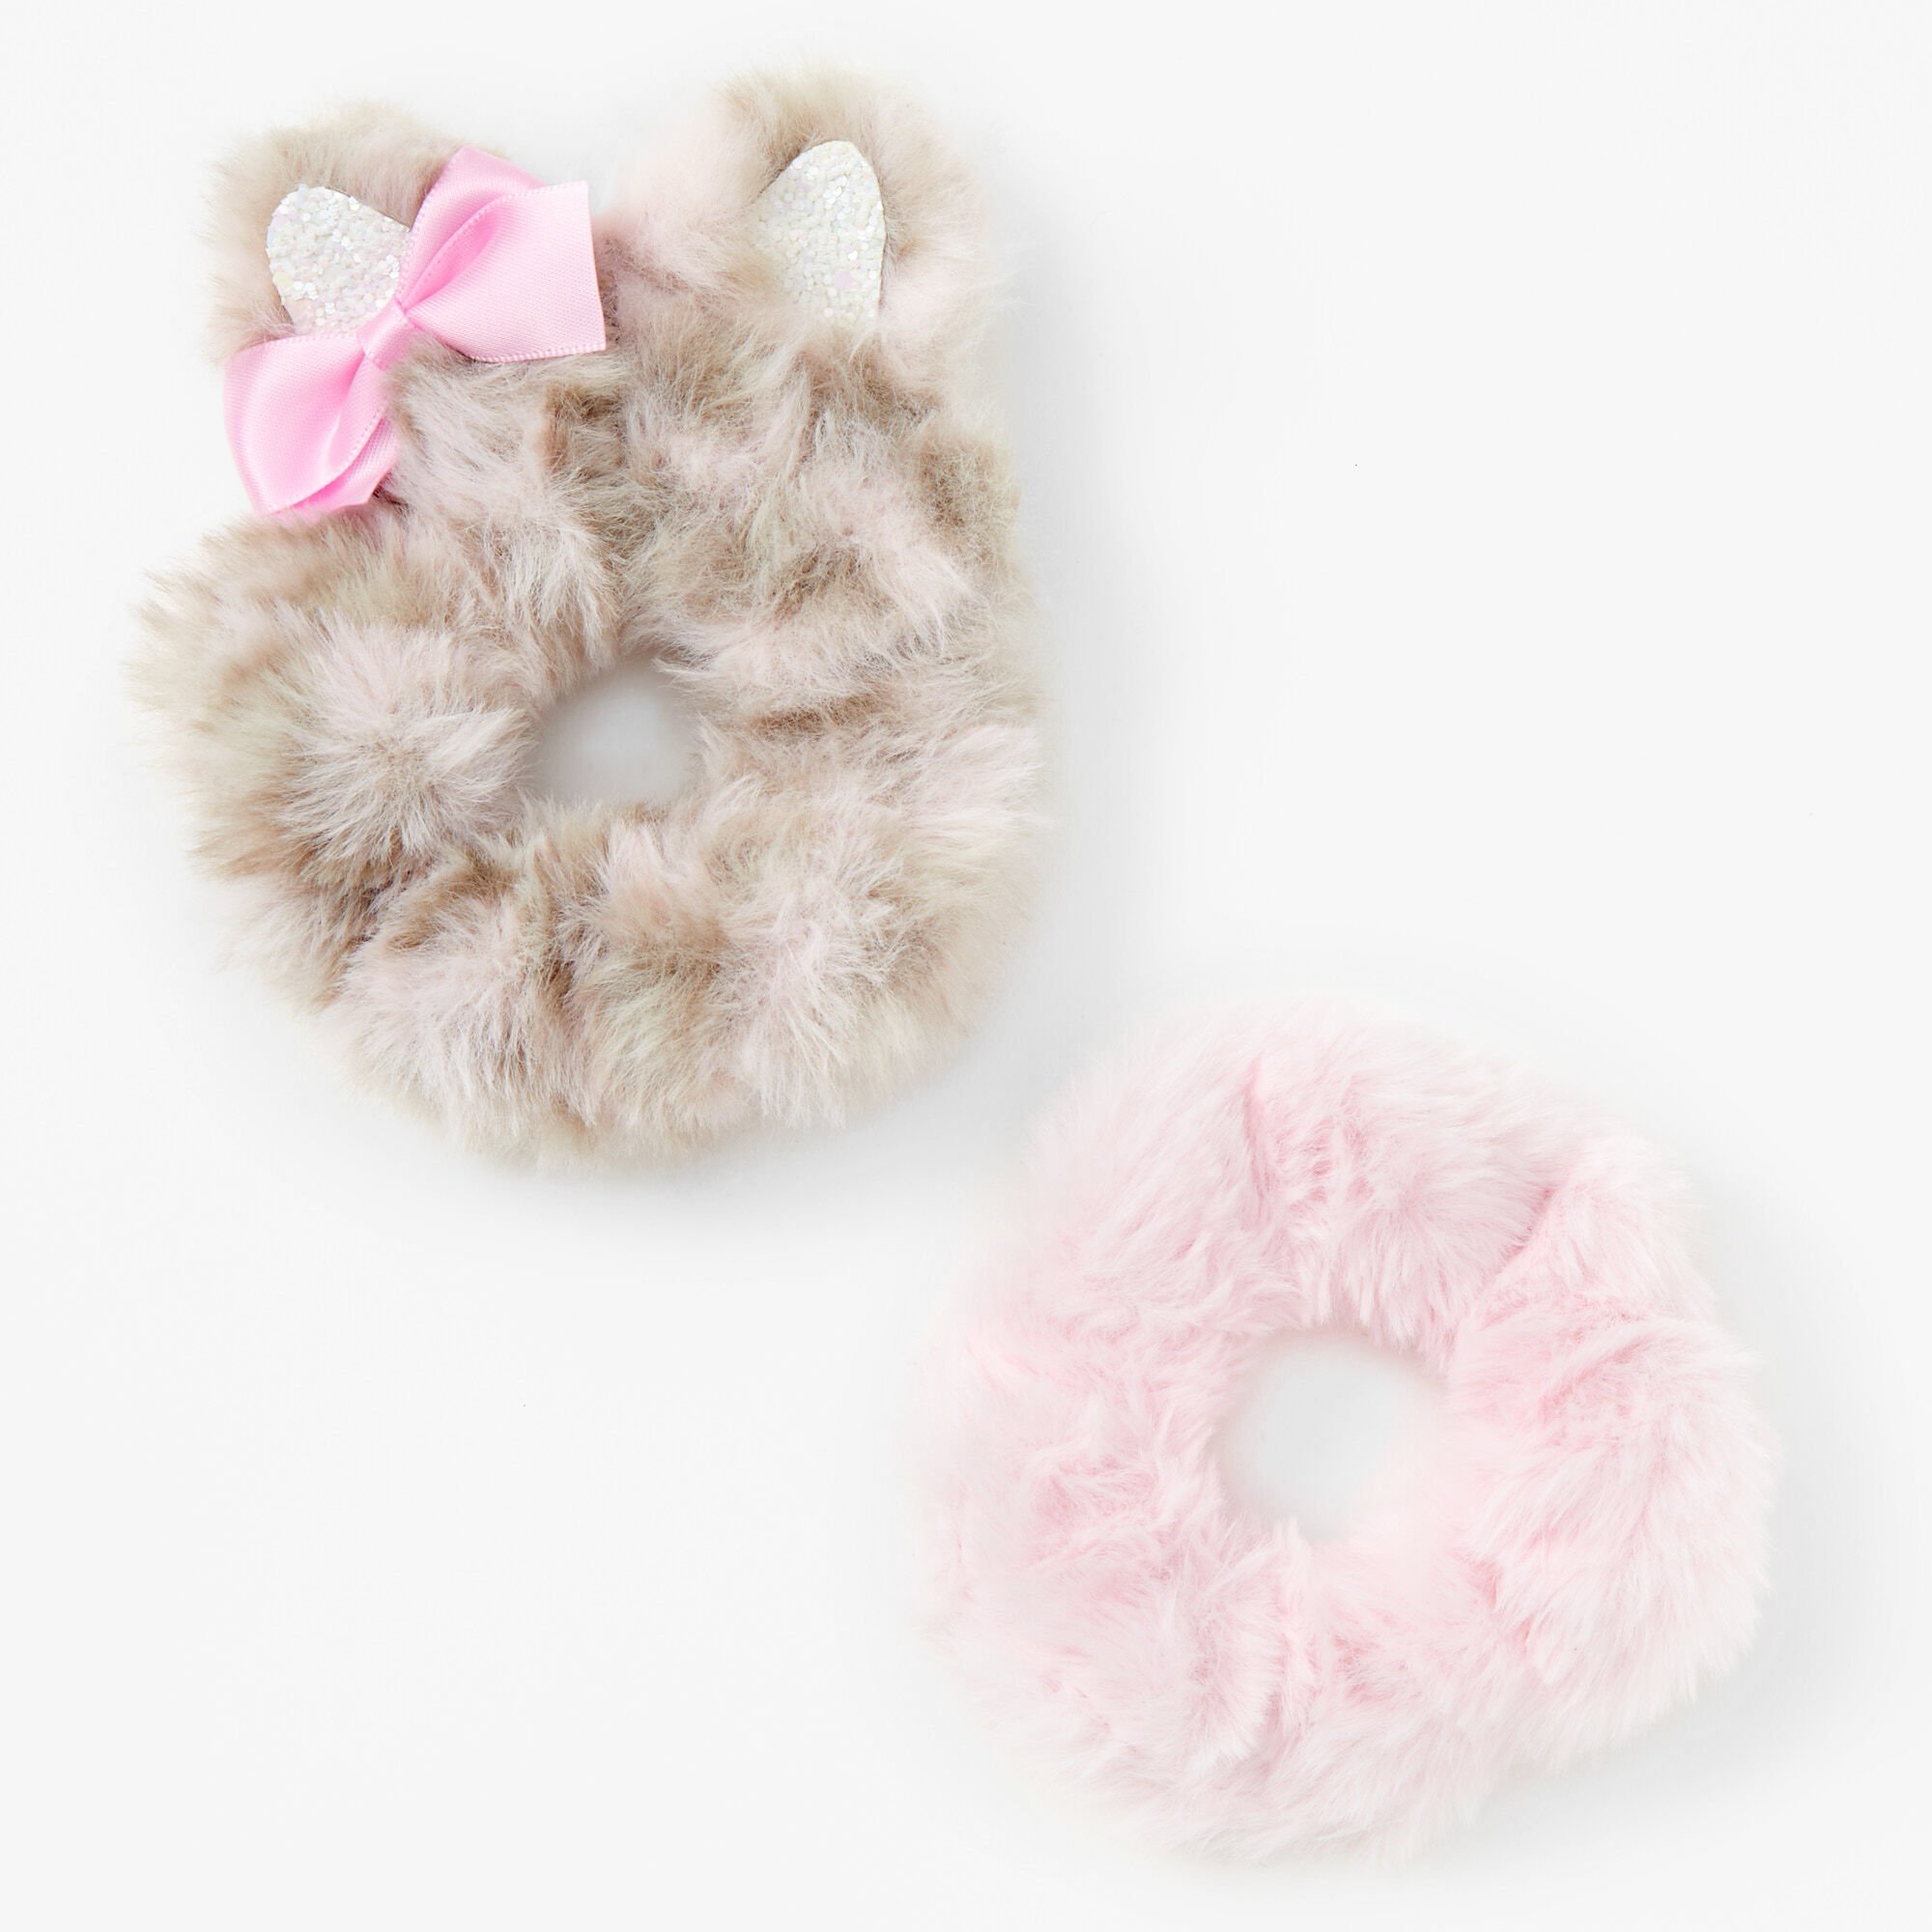 View Claires Club Medium Cat Ear Scrunchies Pink 2 Pack information